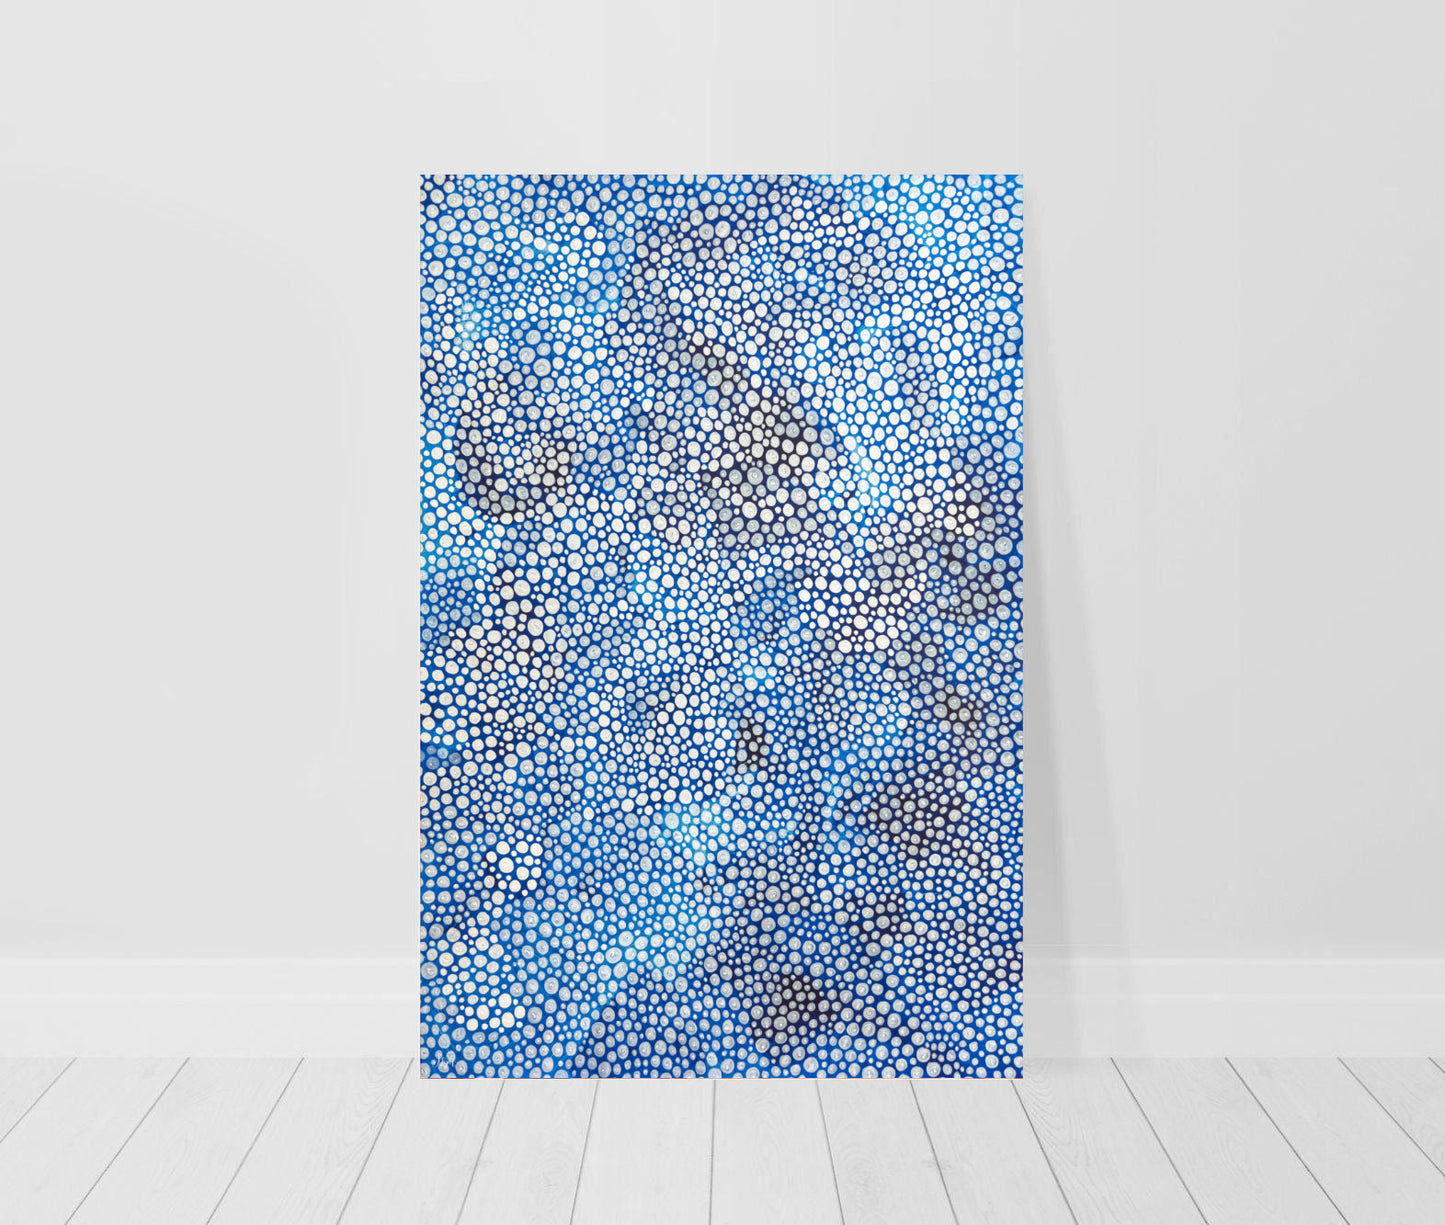 limited edition print of a blue abstract dot painting leaning against a wall